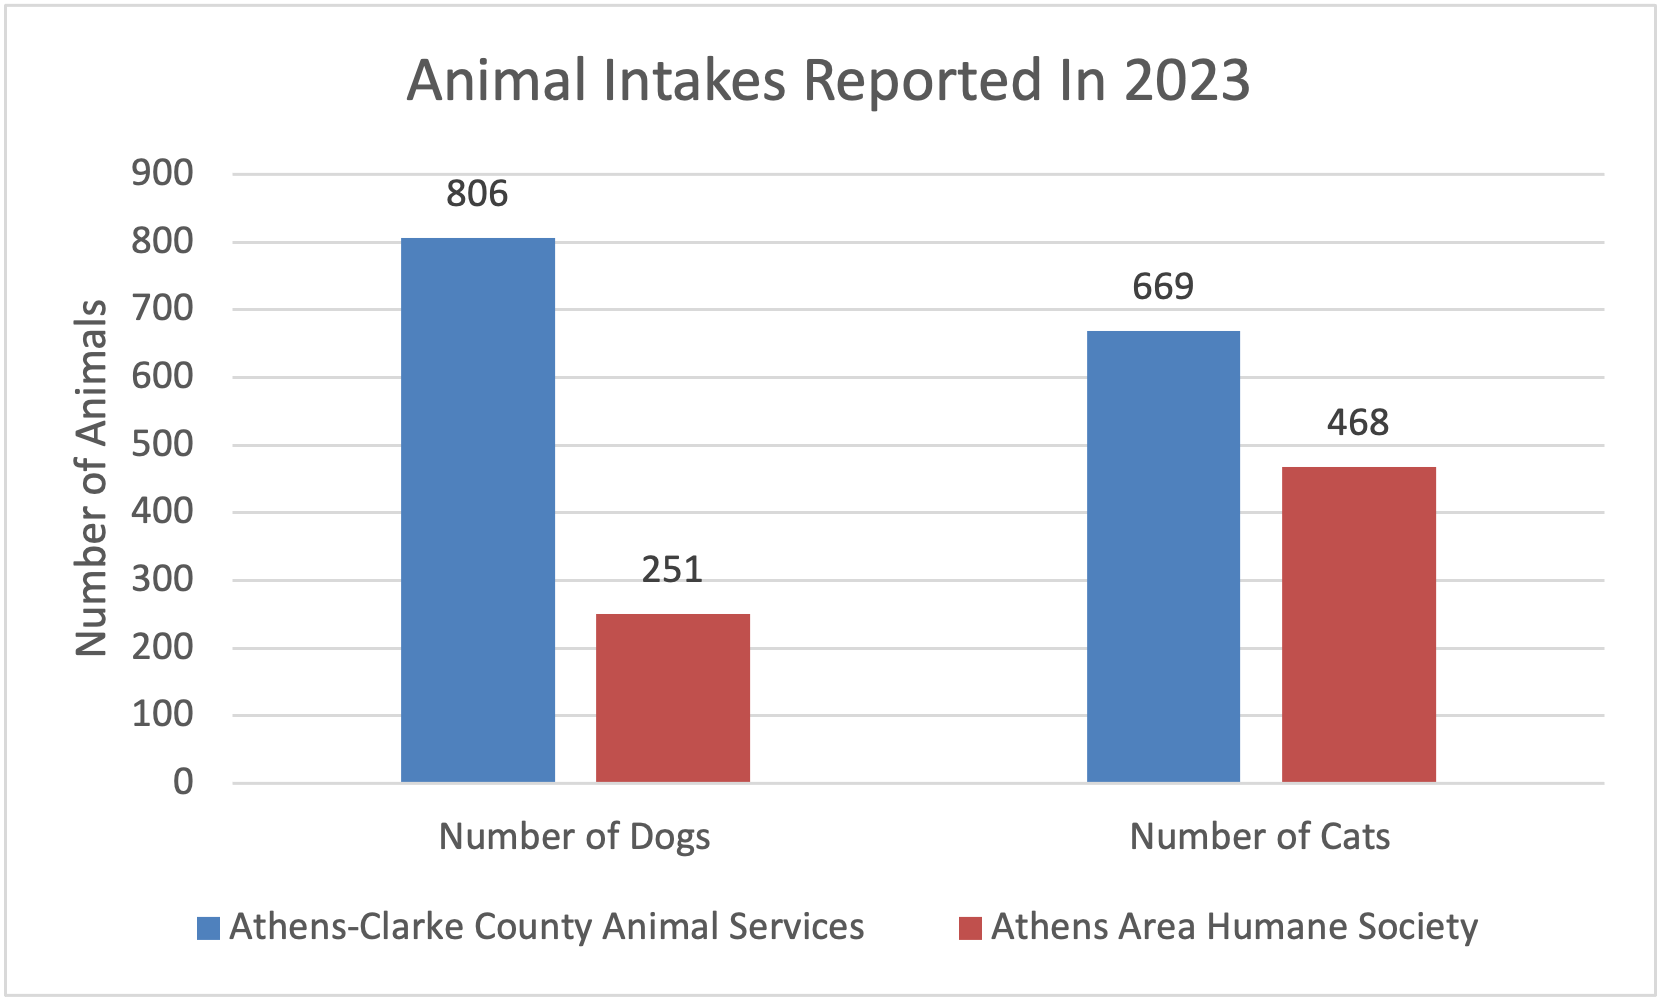 A chart that shows the number of animal intakes reported by Athens-Clarke County Animals Services and Athens Area Humane Society so far in 2023. Animals Services reported 806 dogs and 669 cats while Athens Area Humane Society reported 251 dogs and 468 cats.